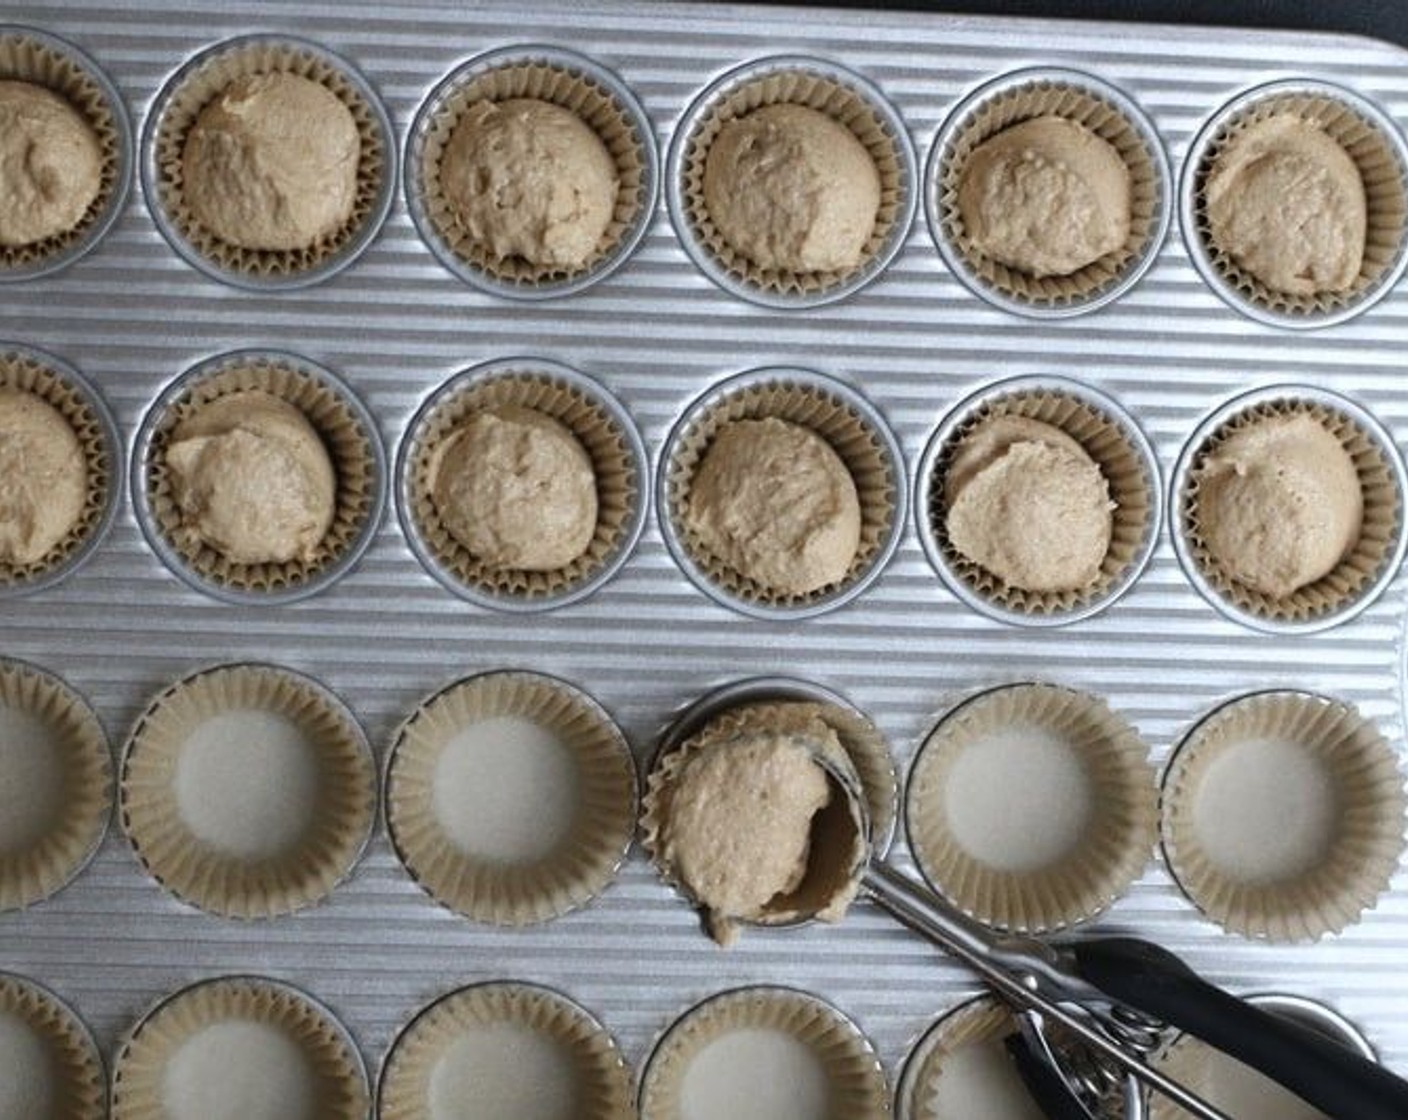 step 6 Using a 1 1/2 tablespoon scoop, place batter in muffin liners. This is the easiest way to ensure that each of your mini-muffins will be the same size and bake evenly.